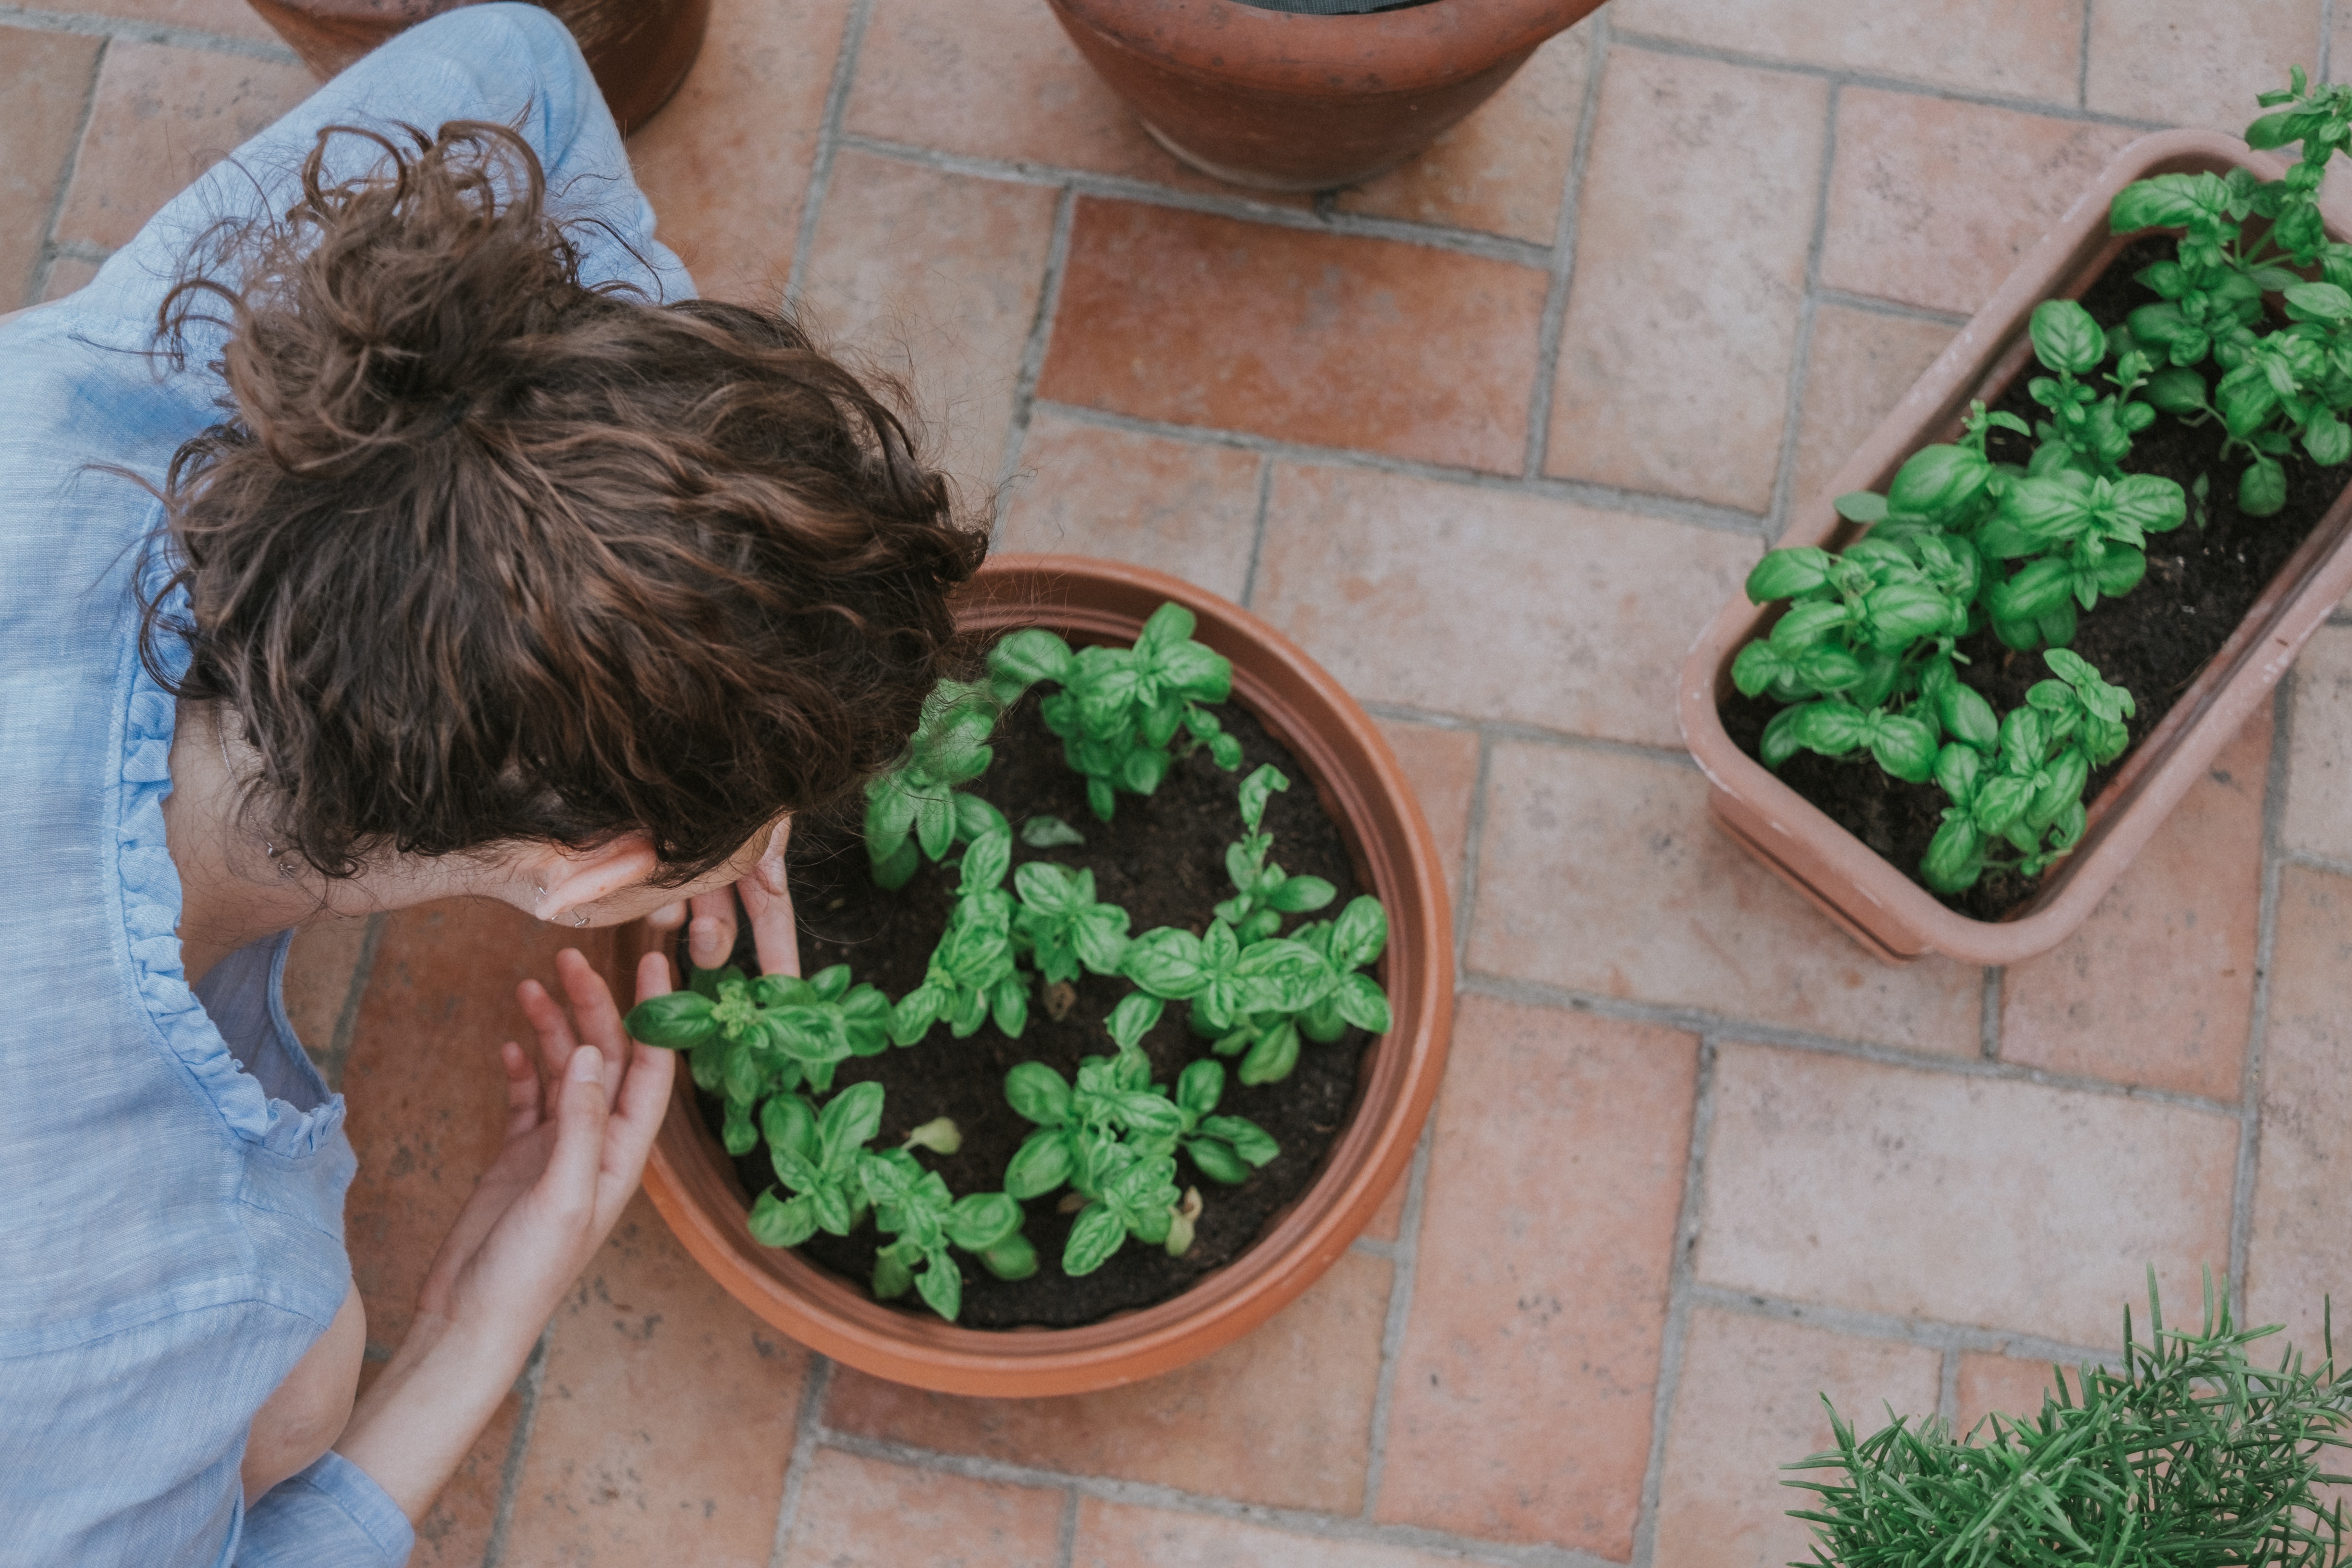 Now is the time to try these 5 simple crops on your balcony!